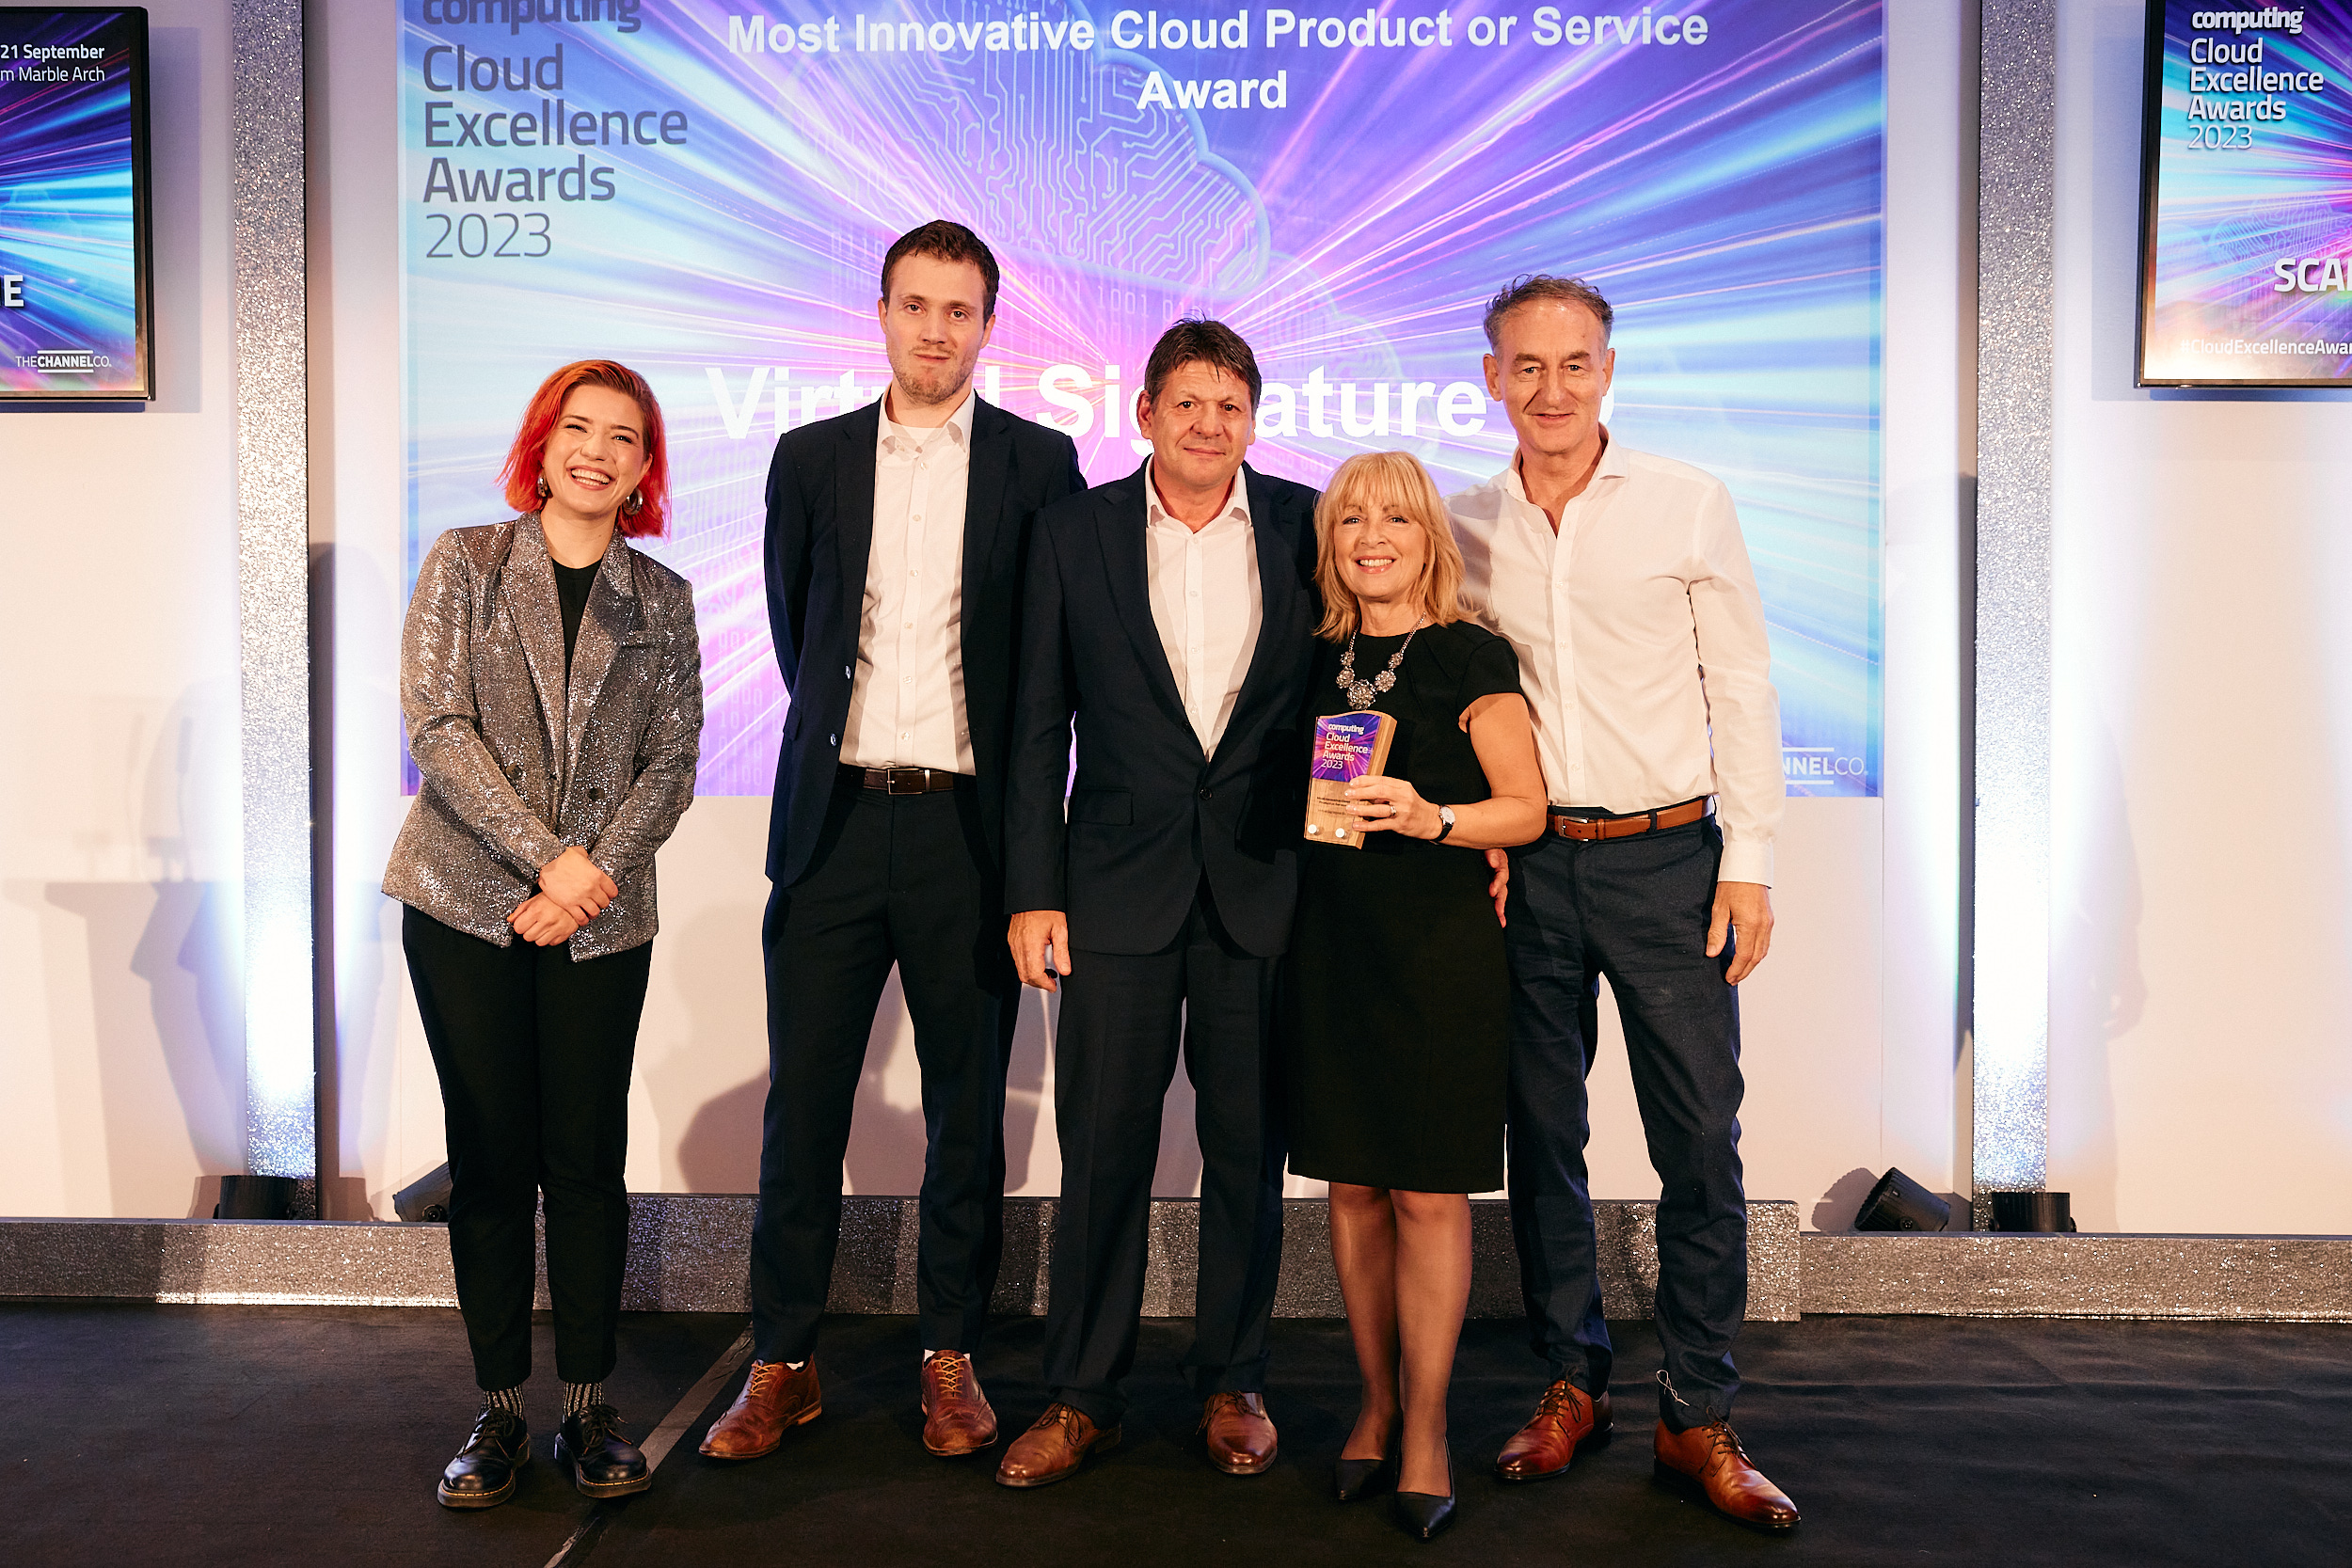 The VirtualSignature-ID team at the Computing Cloud excellence awards 2023